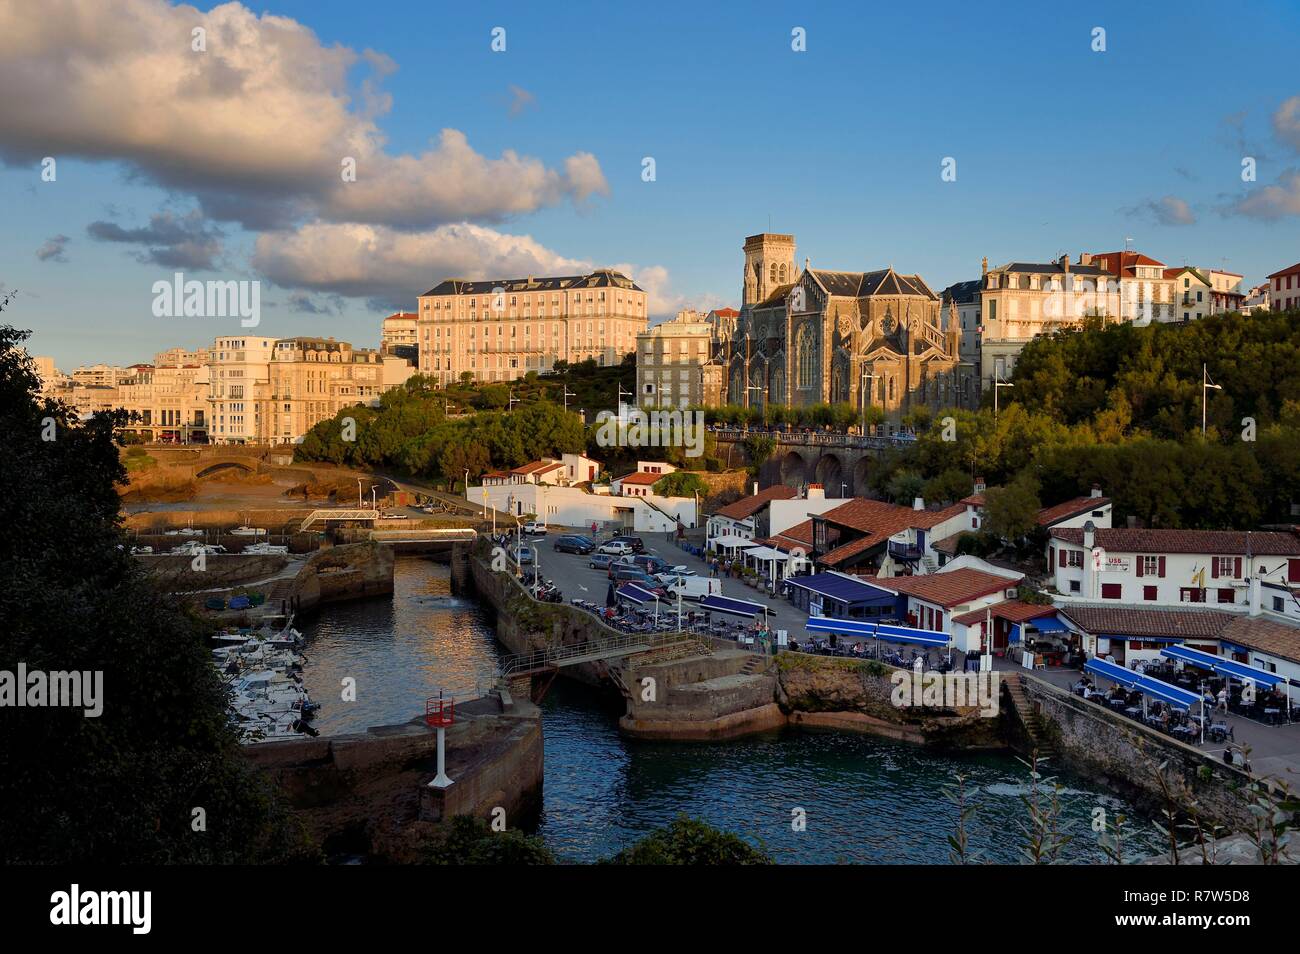 France, Pyrenees Atlantiques, Basque Country, Biarritz, Port des Pecheurs, Sainte Eugenie church and facades of the buildings located on Grande Plage (Great beach) Stock Photo